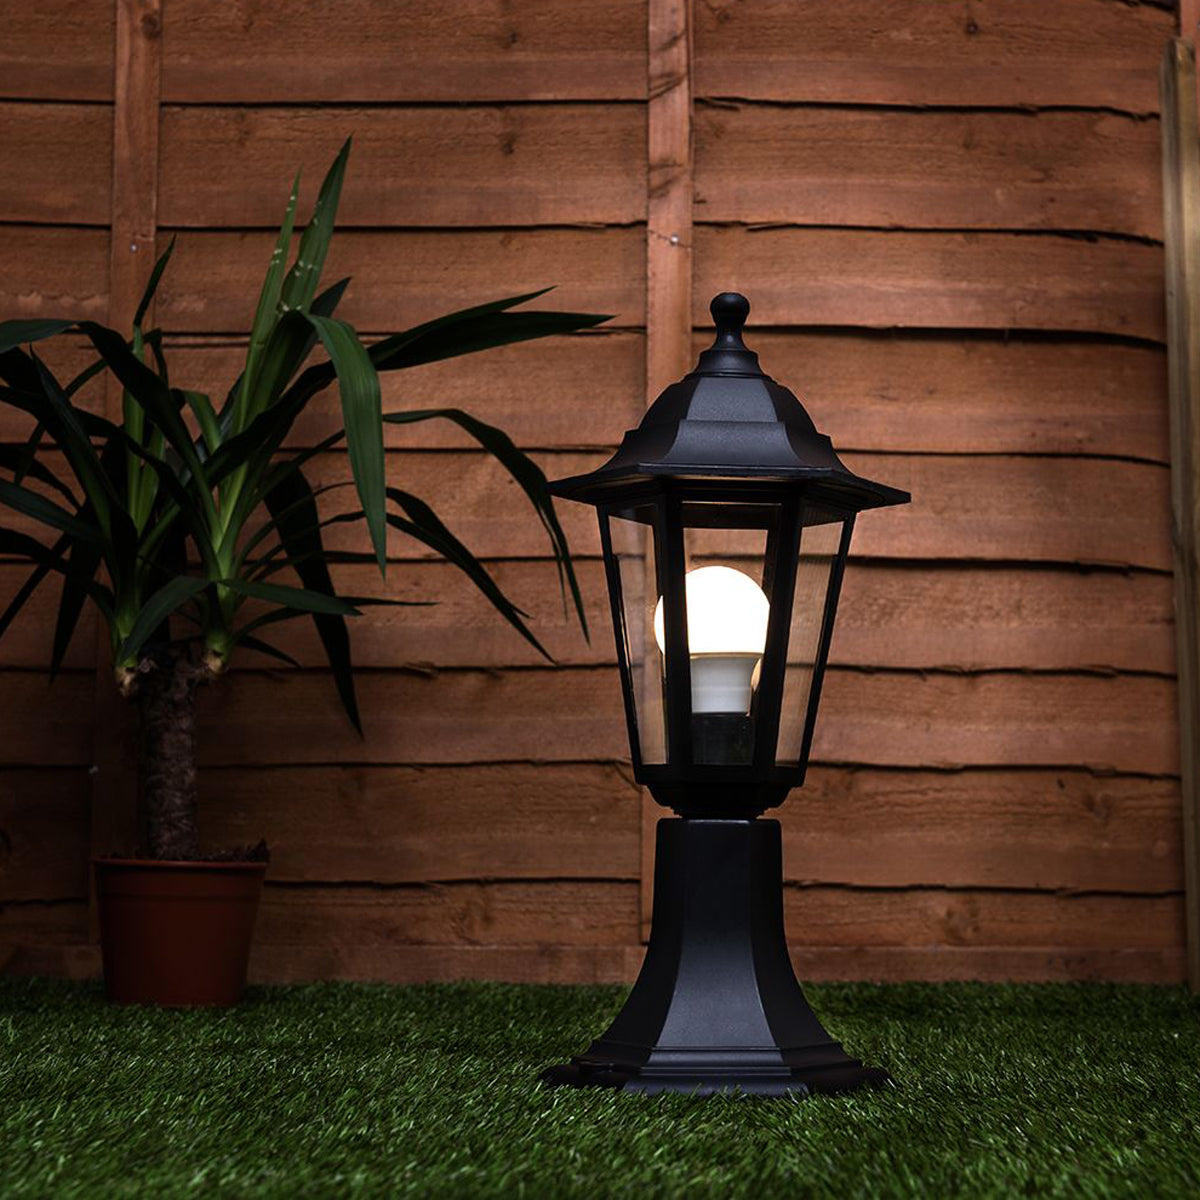 Our Yasmin lantern delivers on style and durability and is a smart choice for your exterior lighting. With its black polycarbonate construction teamed with clear polycarbonate panes, this lantern is hardwearing and rust and weatherproof. Built for life outdoors, it has an IP44 rating which means it can withstand the harshest of weather conditions. For sophisticated yet robust outdoor lighting, our Yasmin black outdoor traditional lantern is a strong contender.